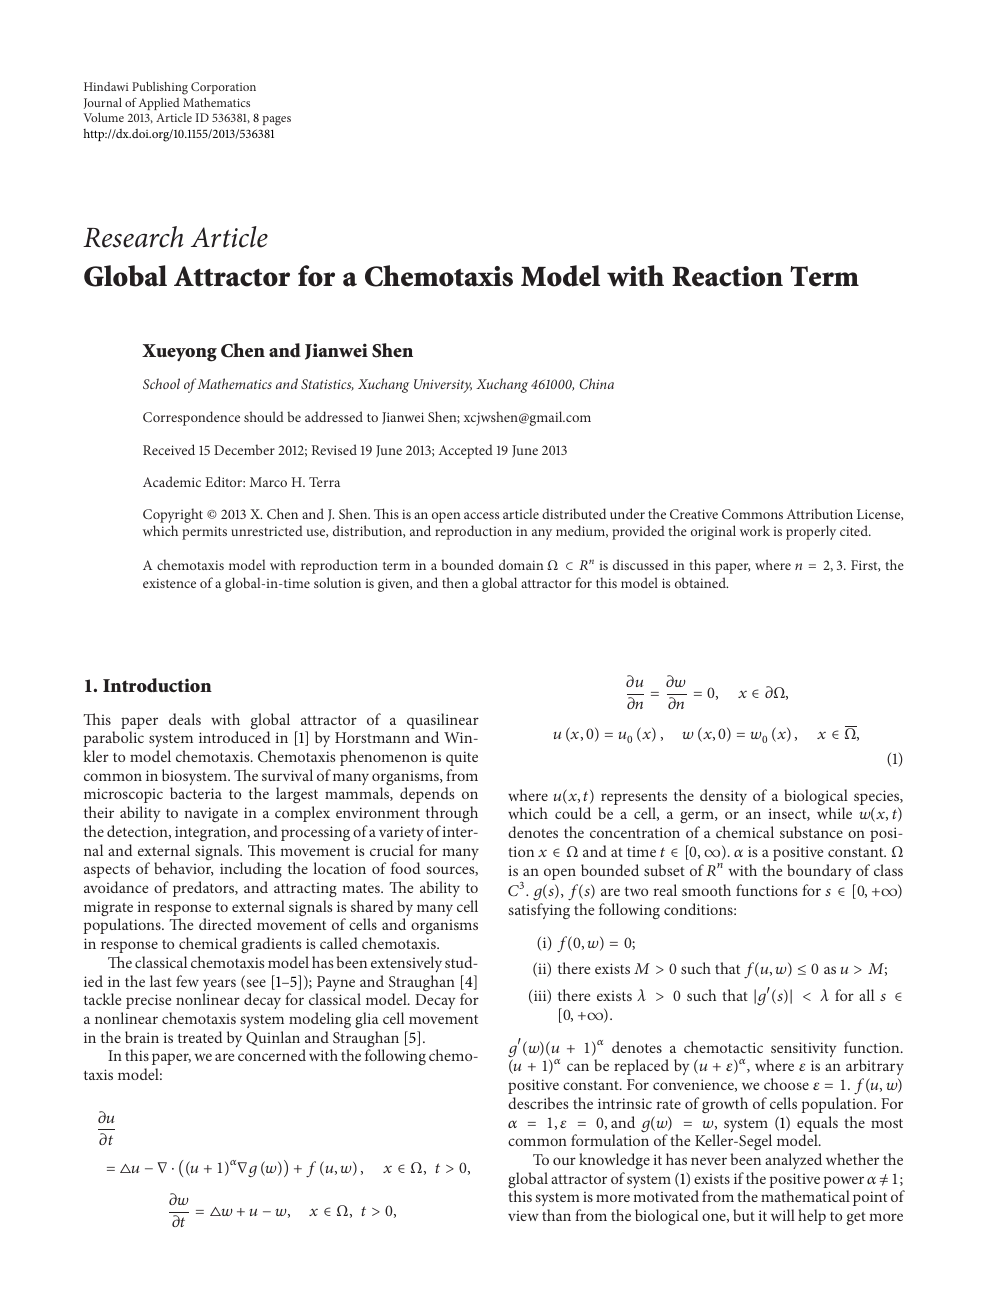 Global Attractor For A Chemotaxis Model With Reaction Term Topic Of Research Paper In Mathematics Download Scholarly Article Pdf And Read For Free On Cyberleninka Open Science Hub